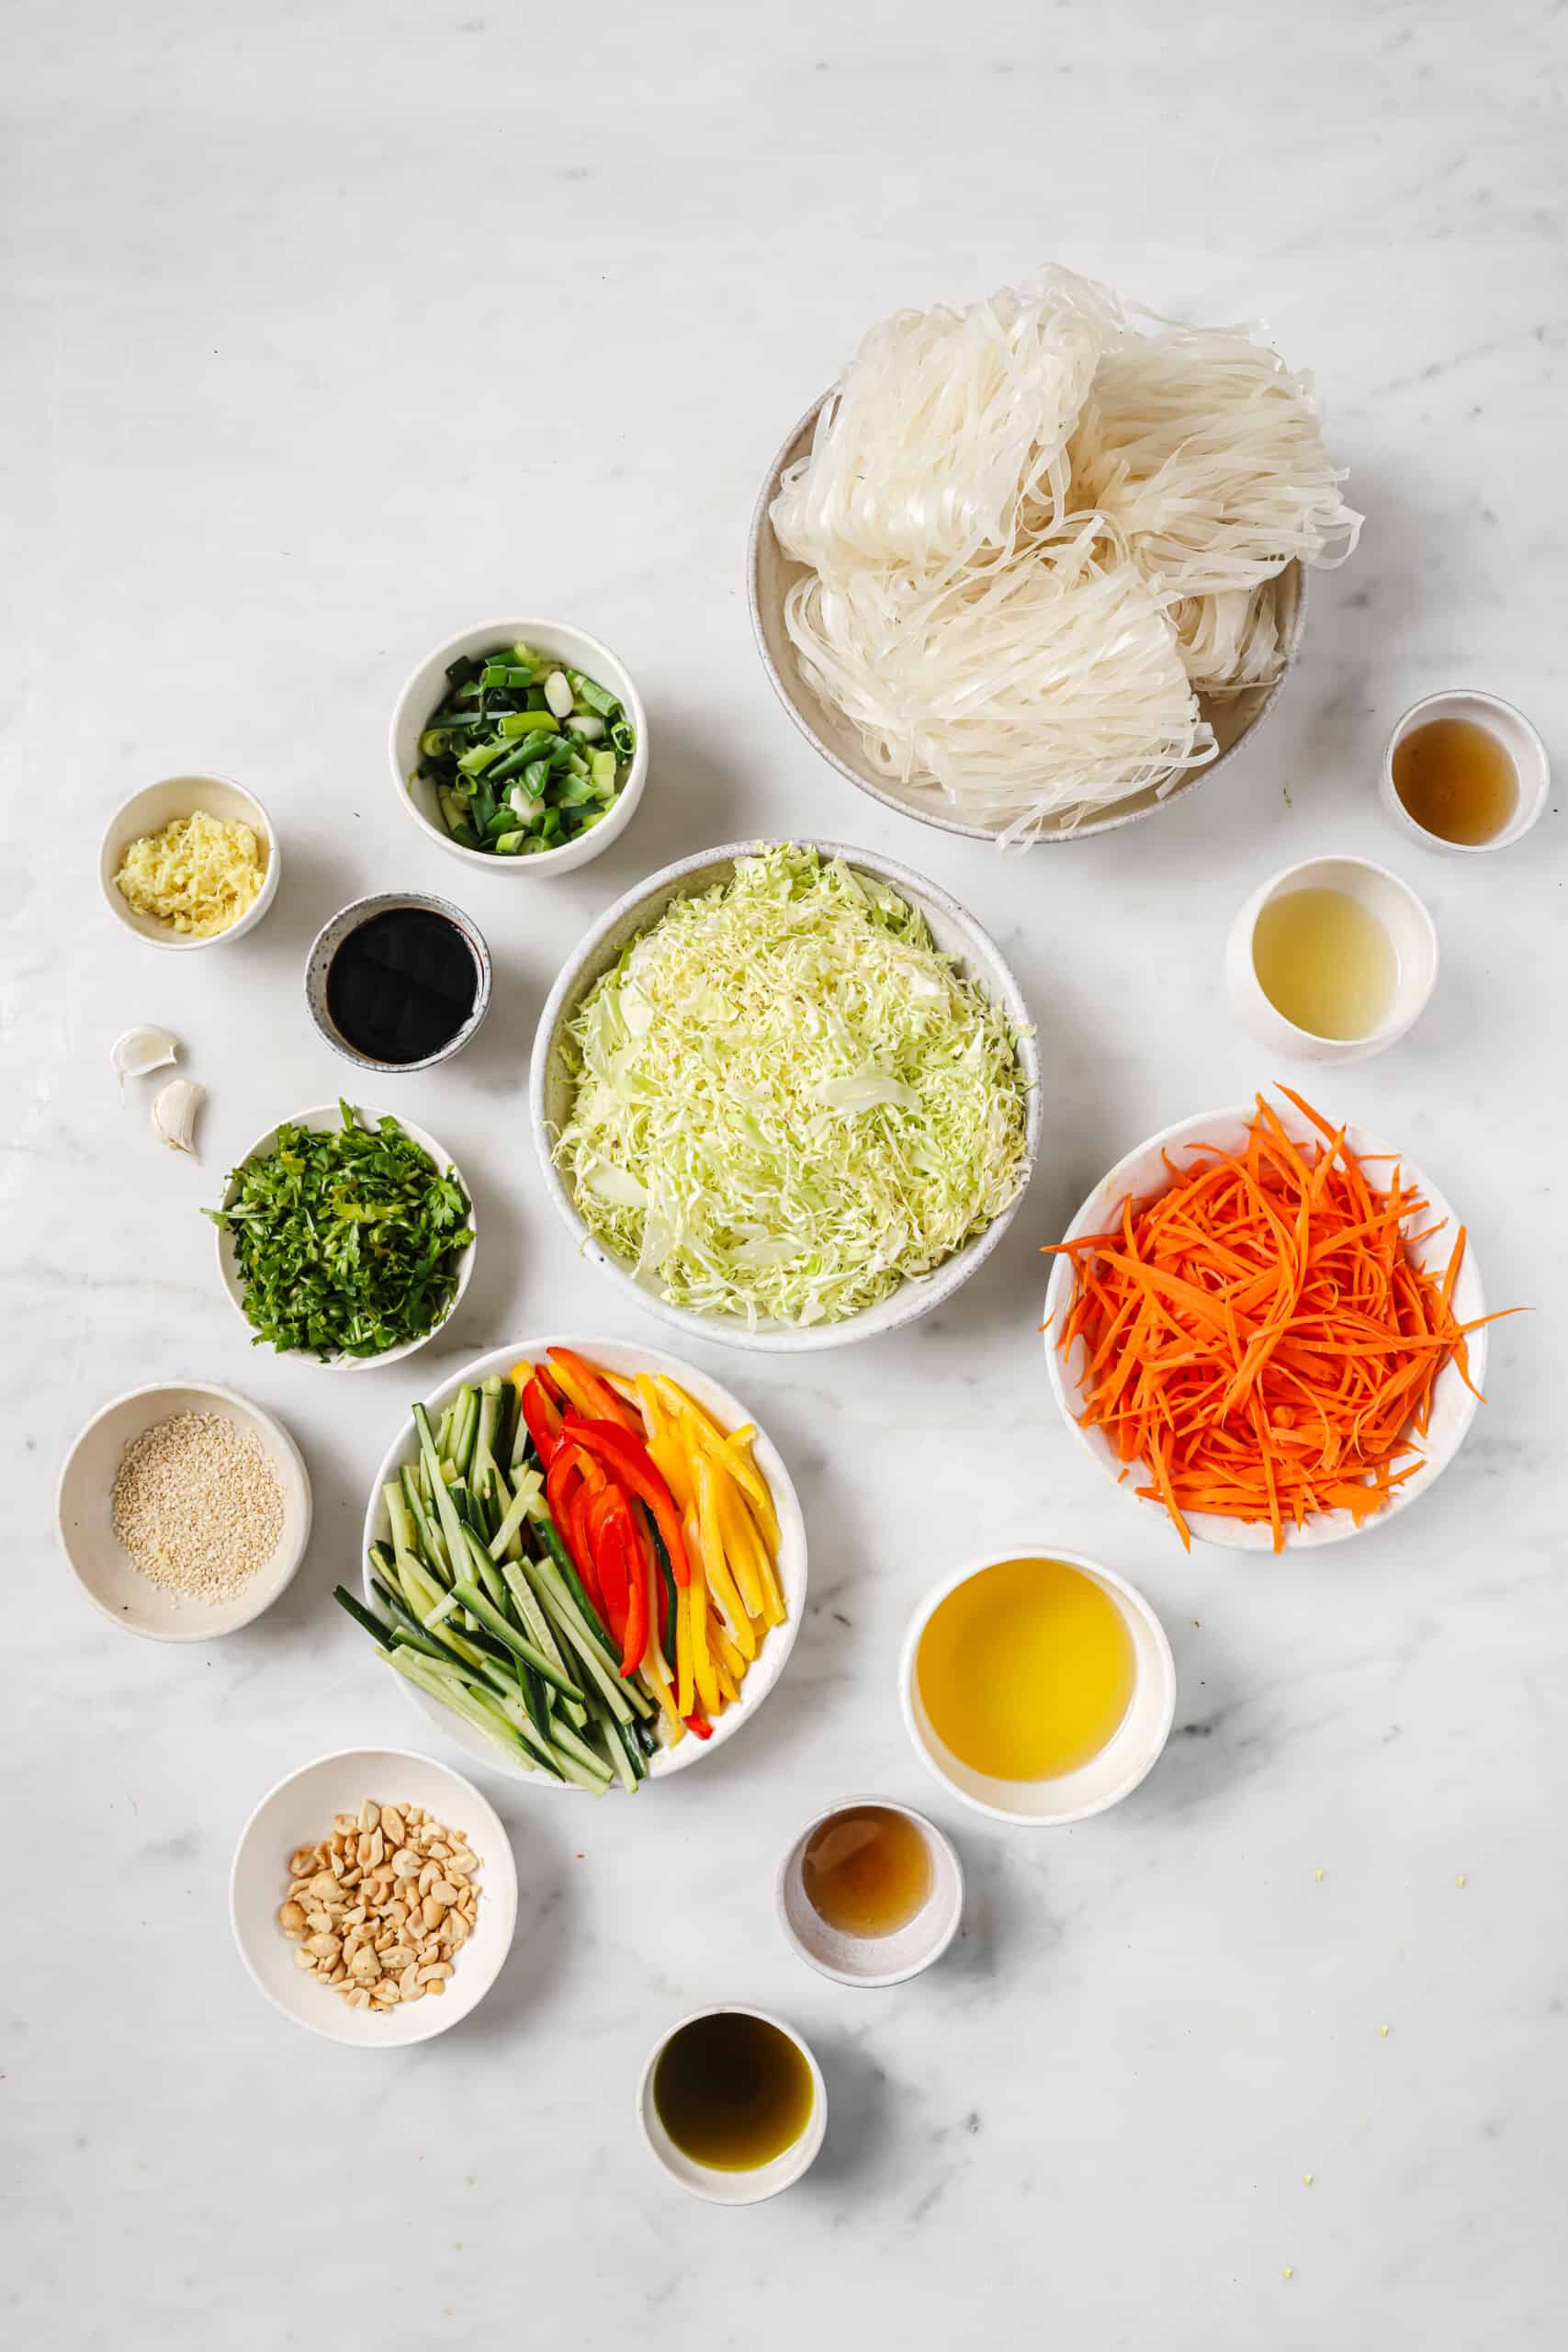 Ingredients for Asian noodle salad recipe.